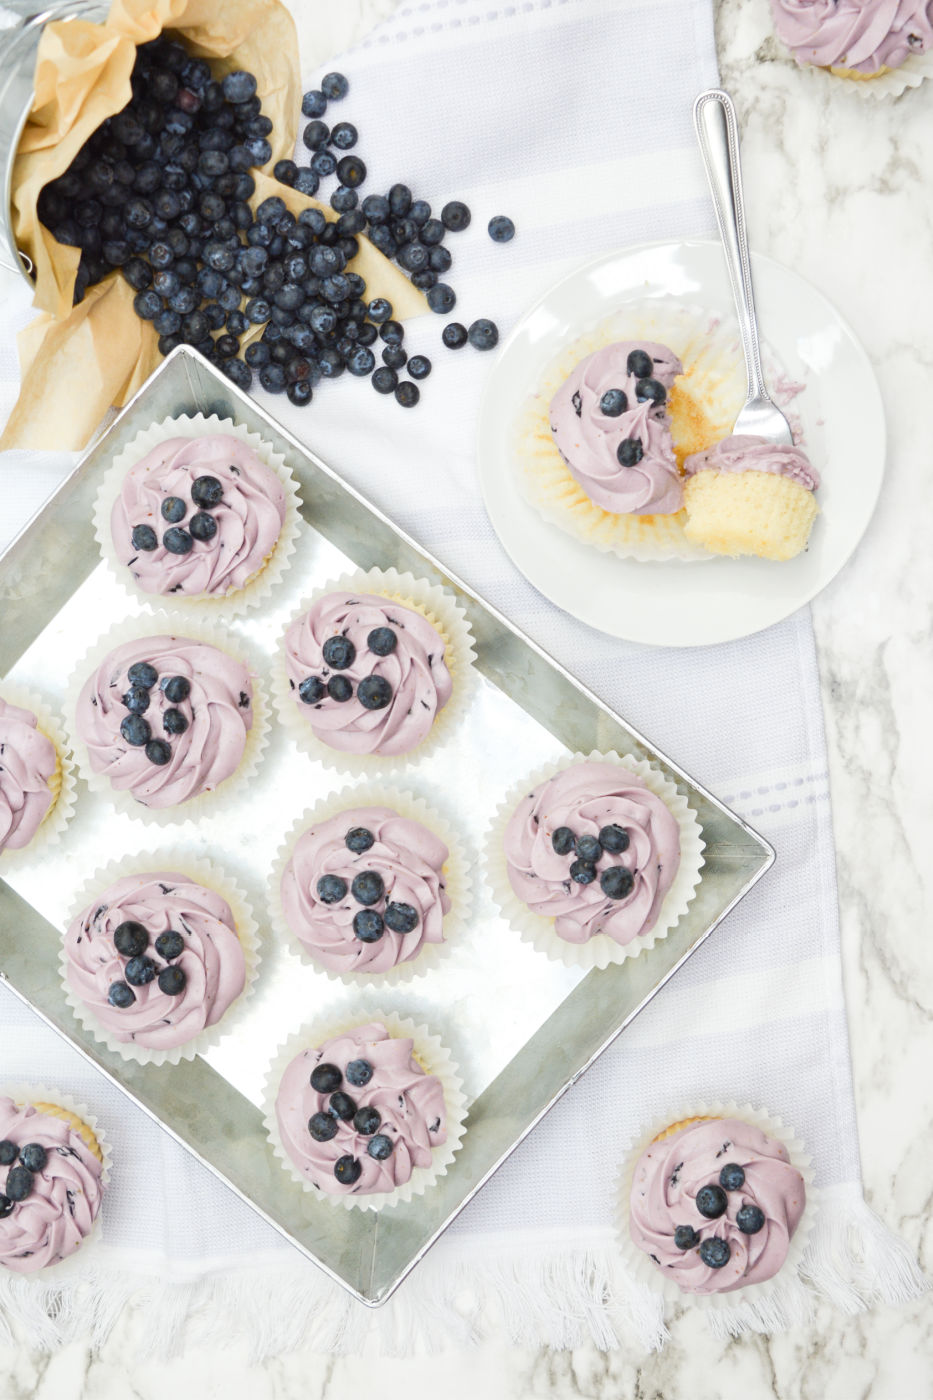 A tray full of blueberry cream cheese cupcakes near loose fresh blueberries